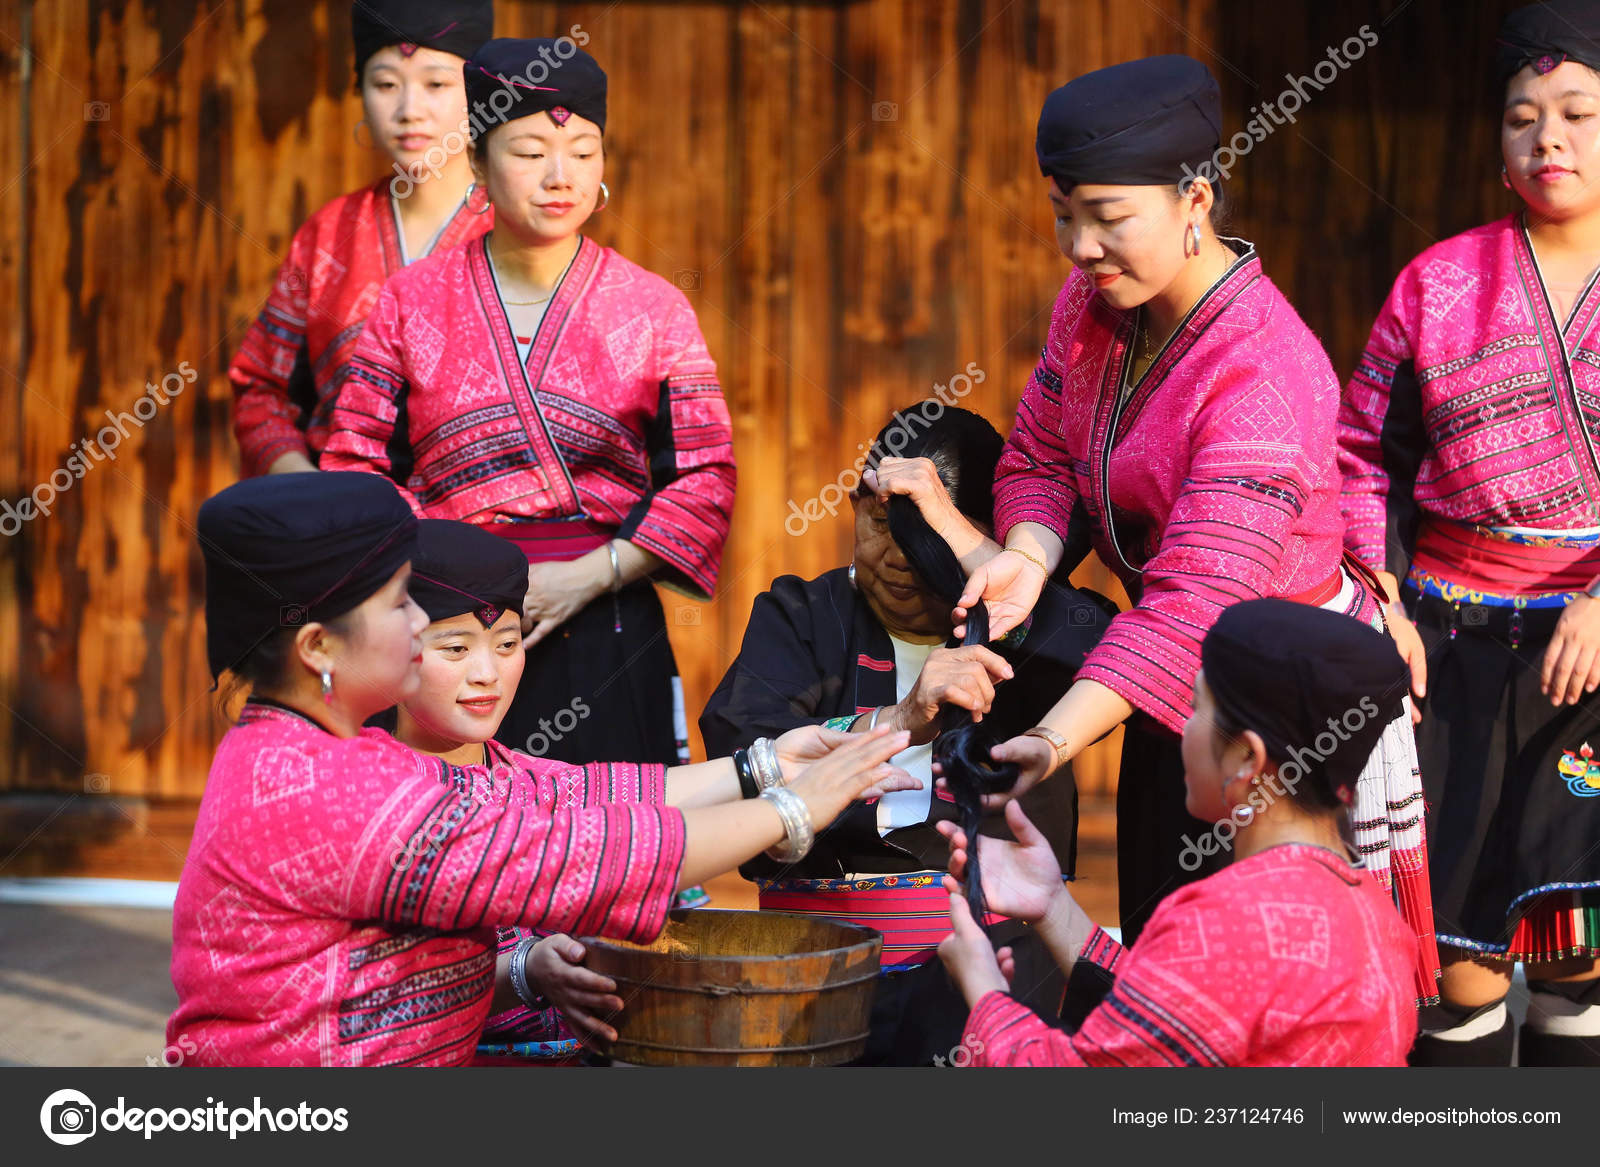 Chinese Woman Red Yao Ethnic Group Dressed Traditional Costume Shows –  Stock Editorial Photo © ChinaImages #237124746